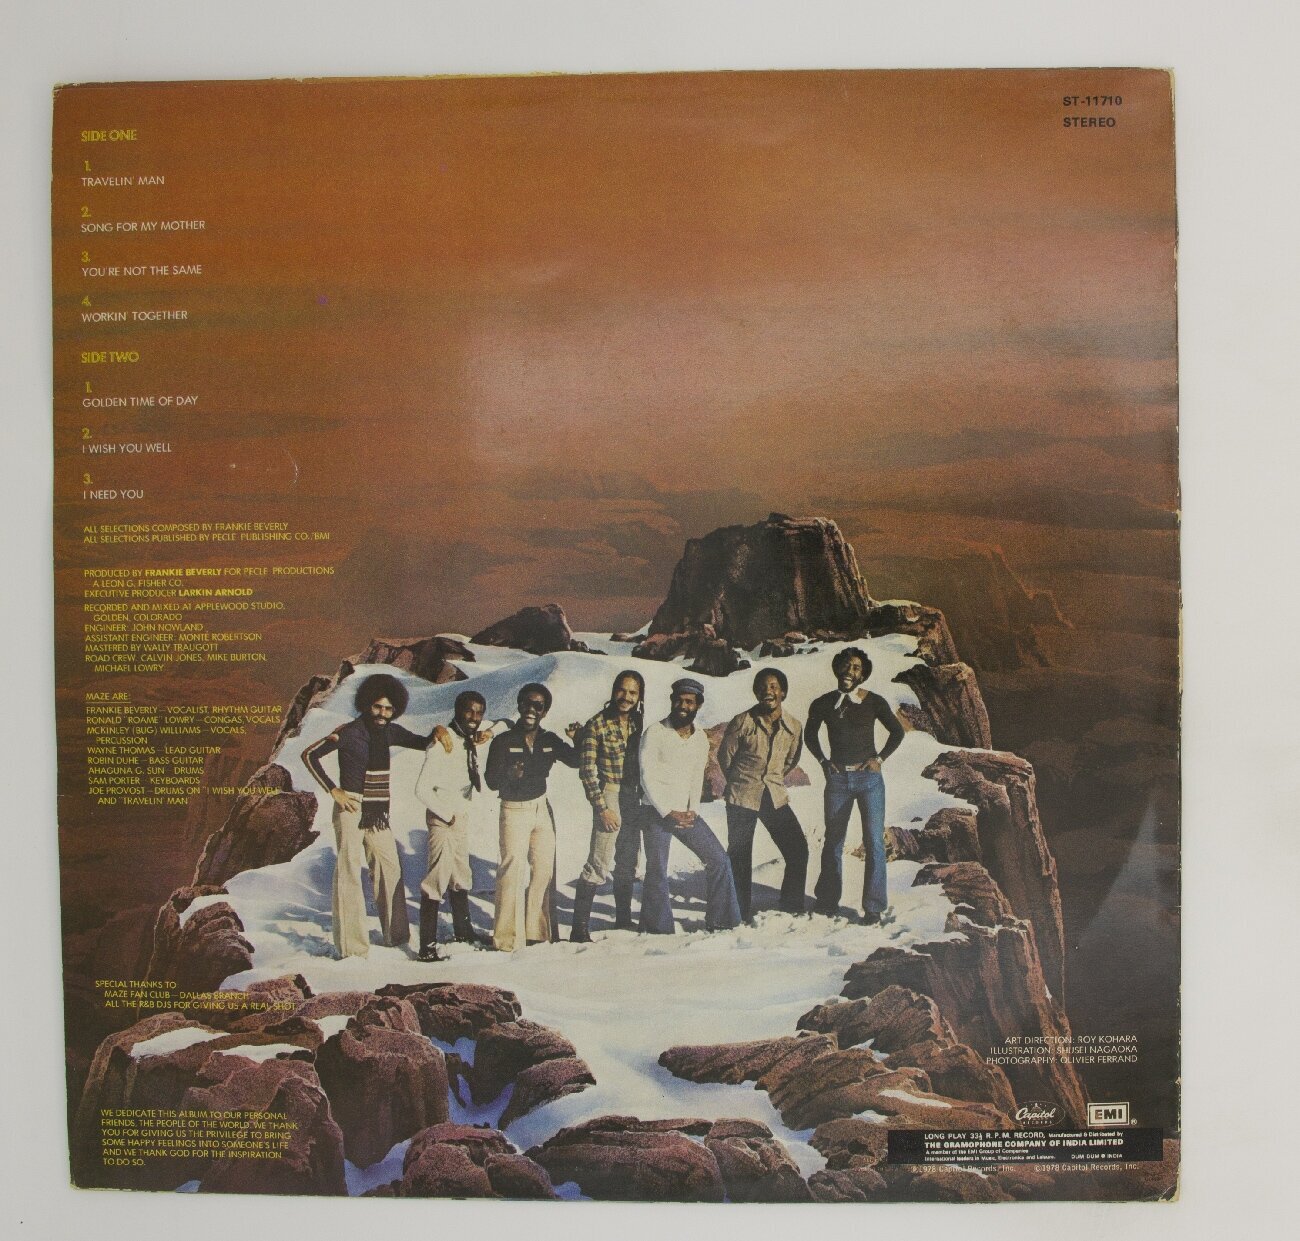 Frankie beverly and maze golden time of day